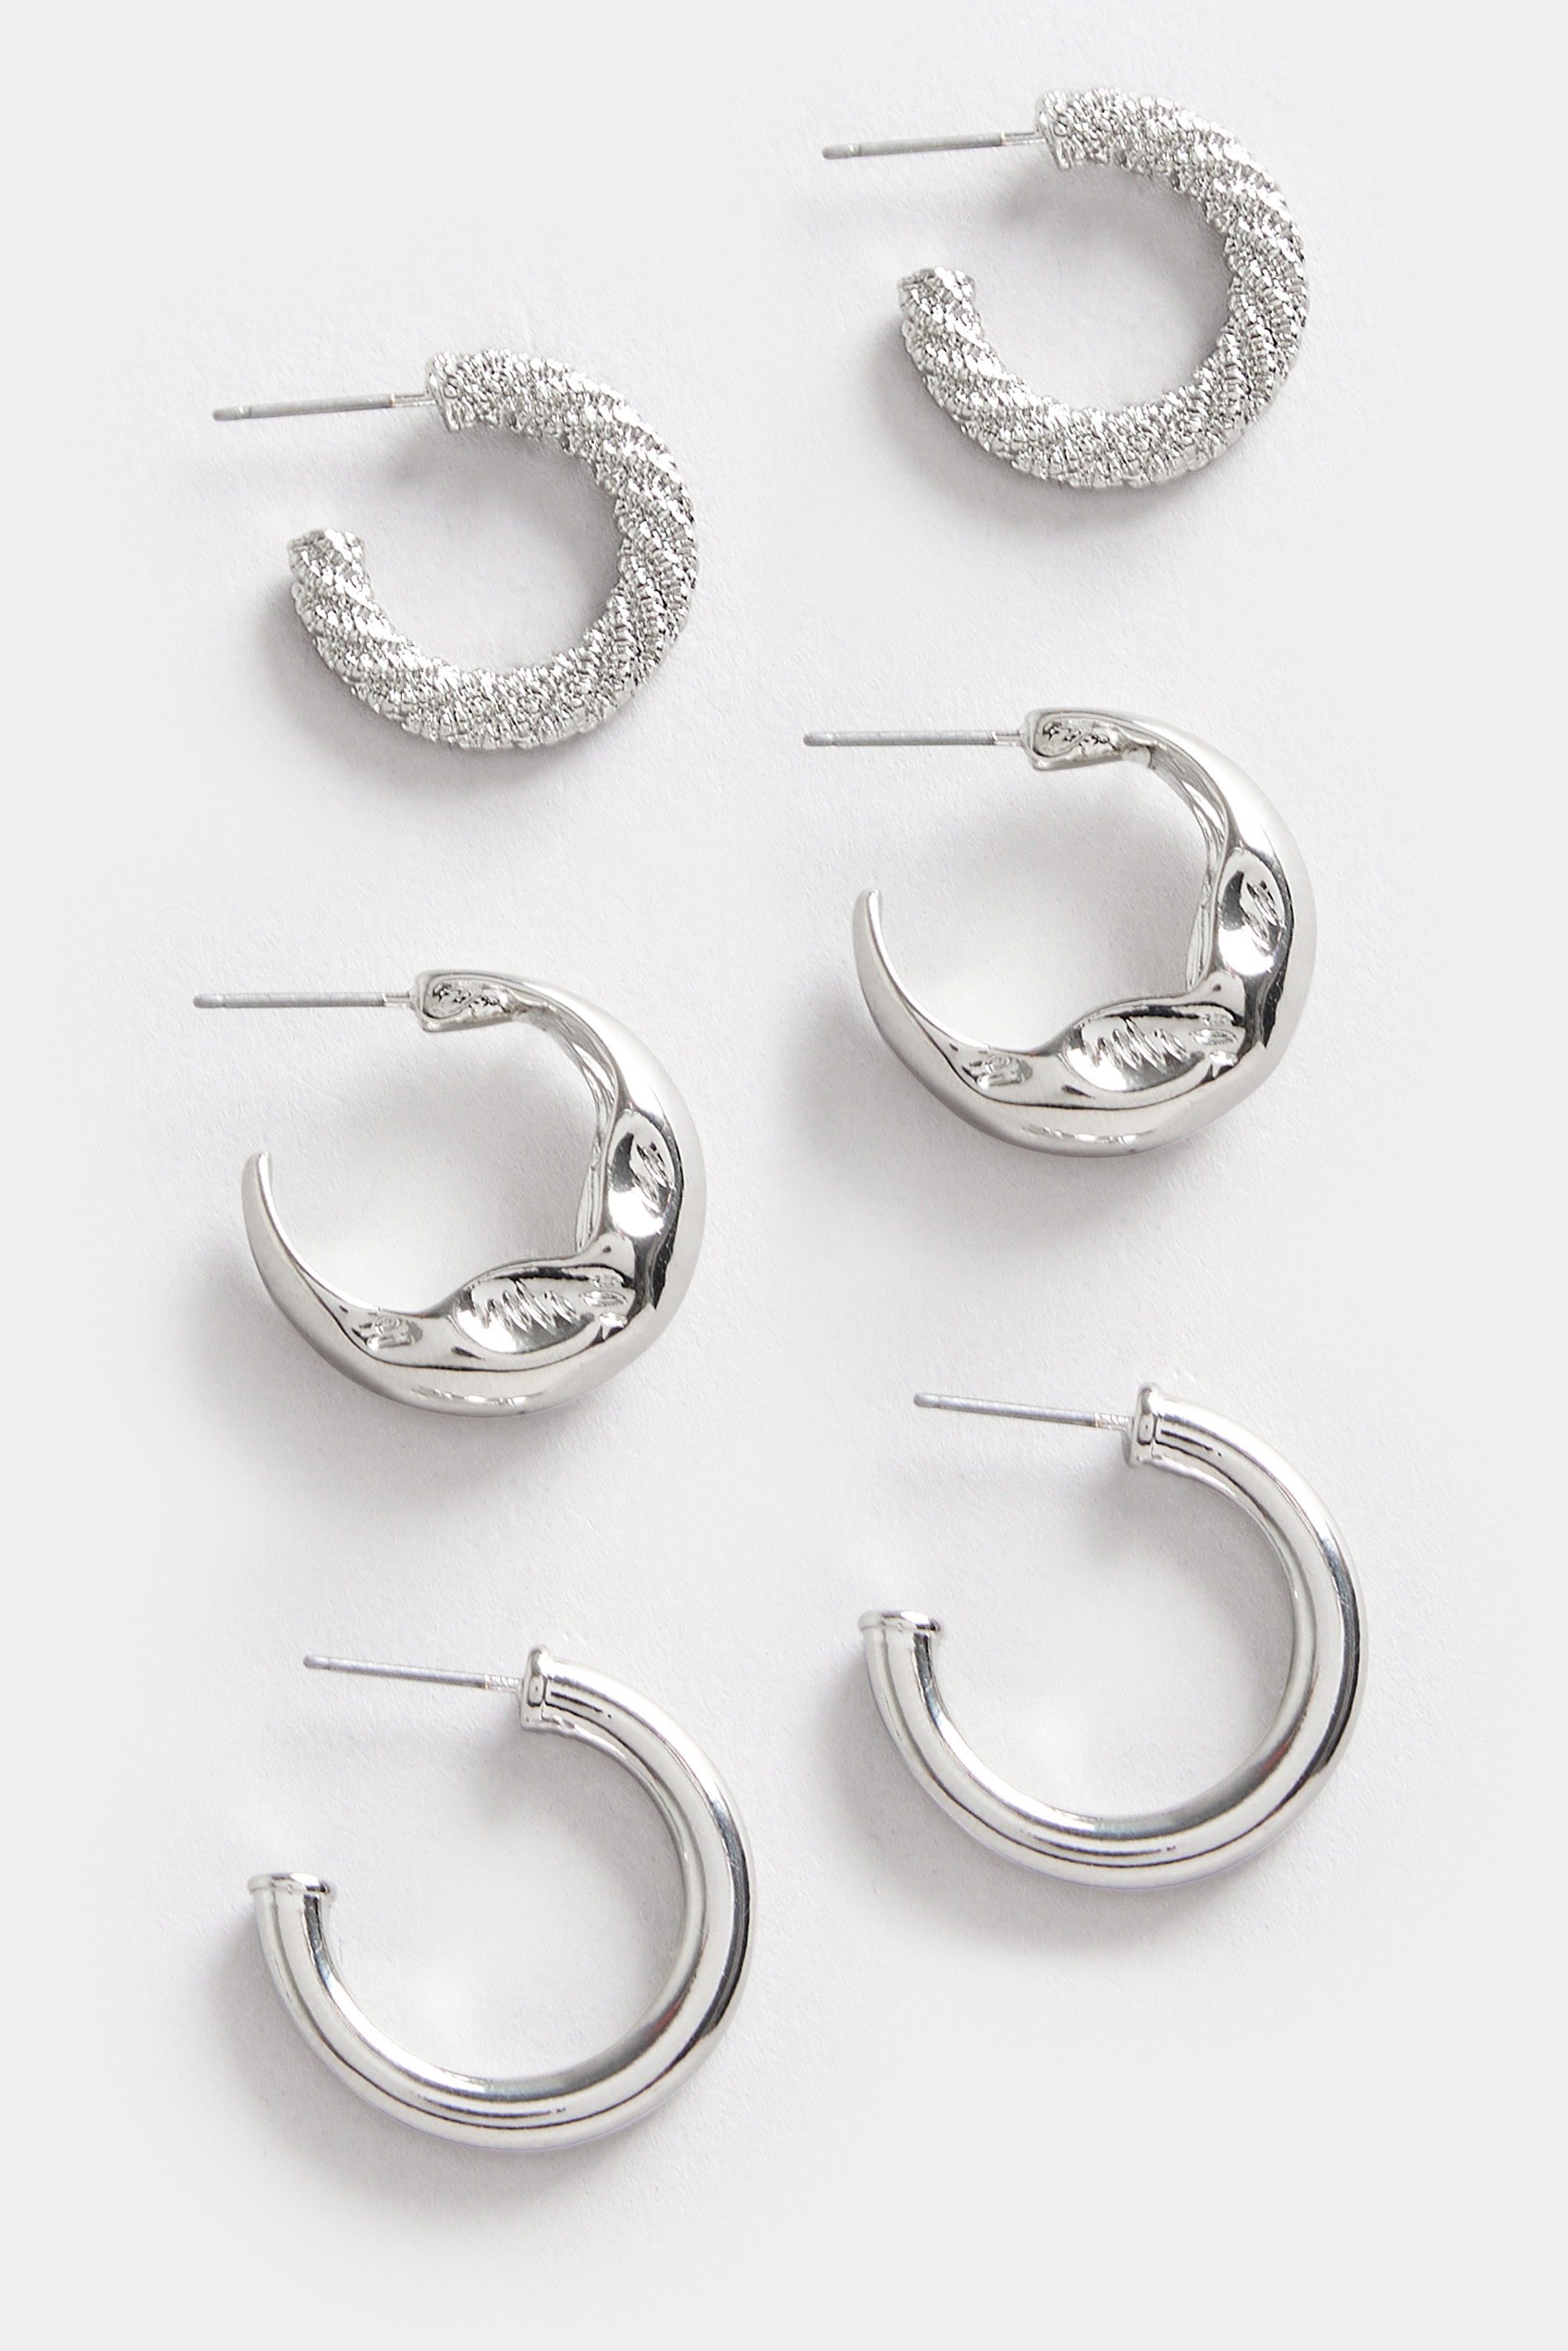 3 PACK Silver Tone Textured Hoop Earrings Set | Yours Clothing 3